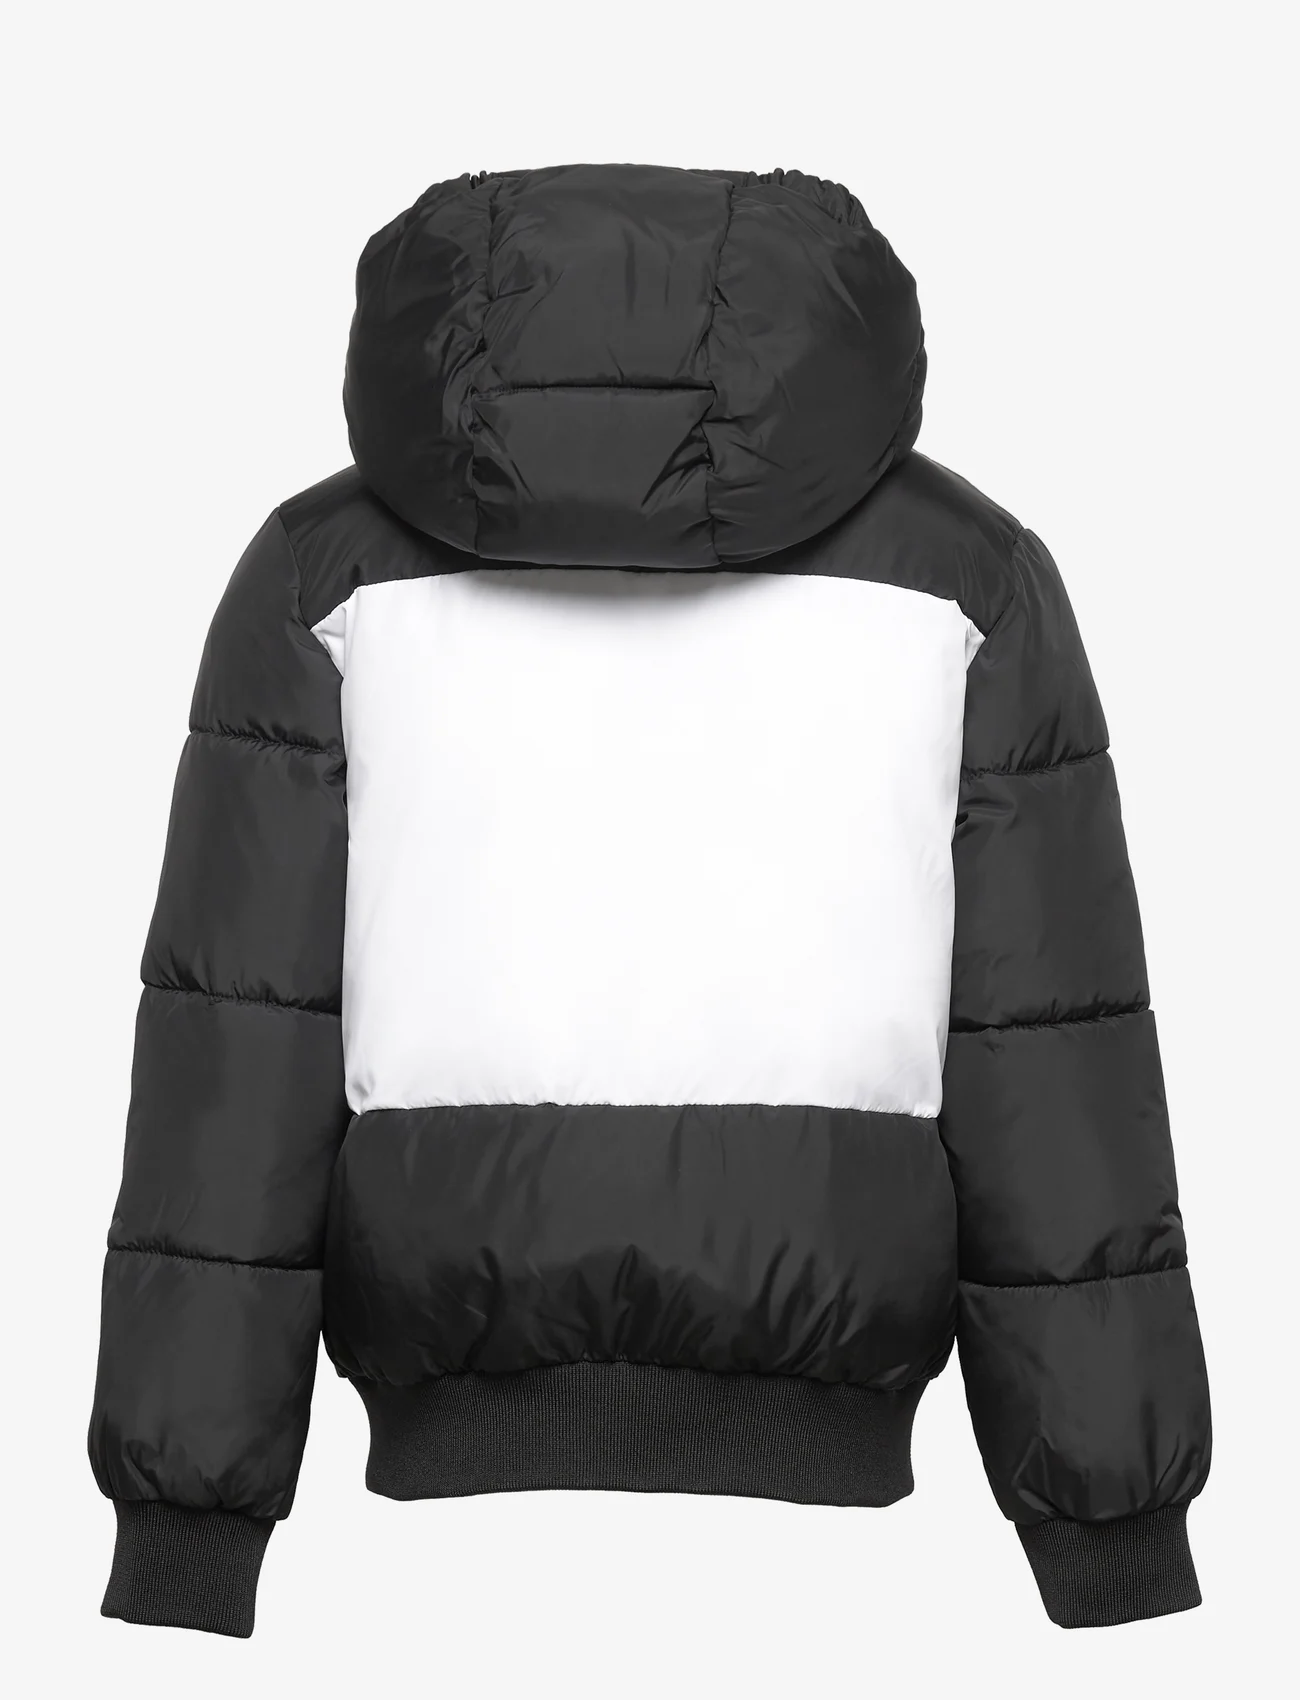 Calvin Klein Clr Block Puffer Jacket  €. Buy Puffer & Padded from Calvin  Klein online at . Fast delivery and easy returns